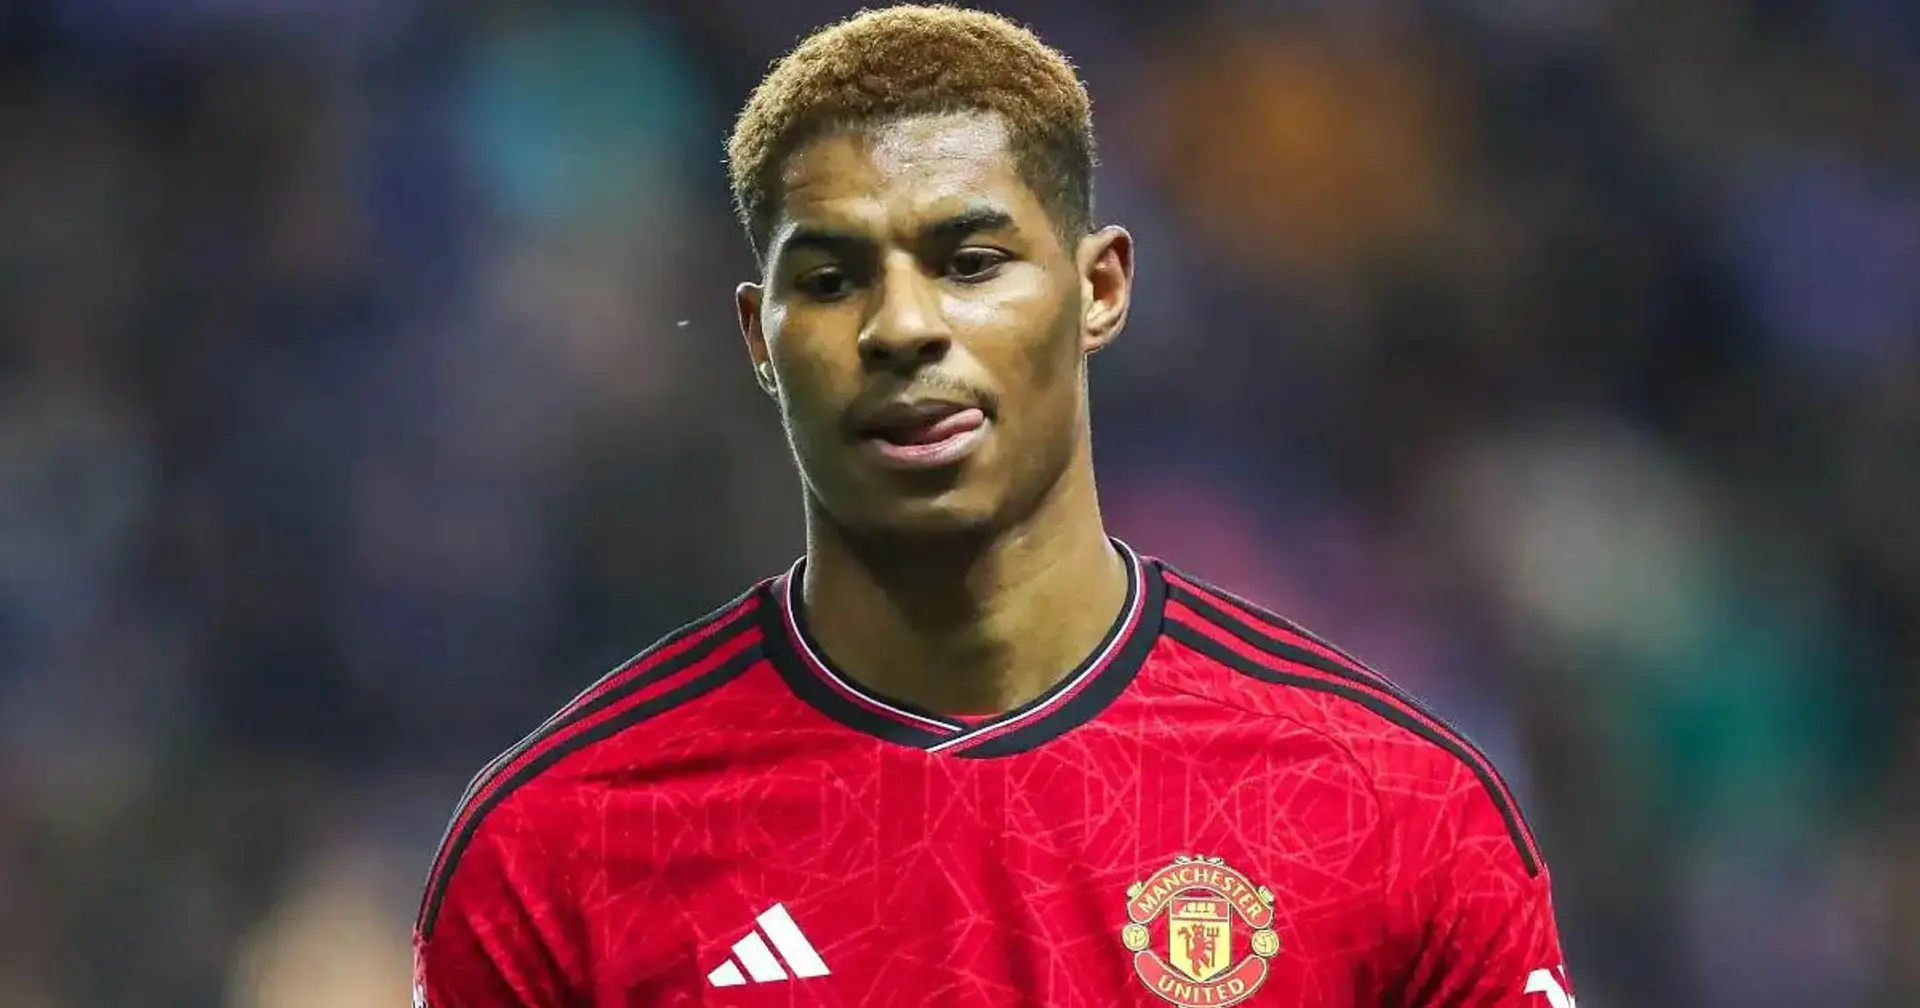 Man United deliver statement explaining Rashford's absence from Newport clash